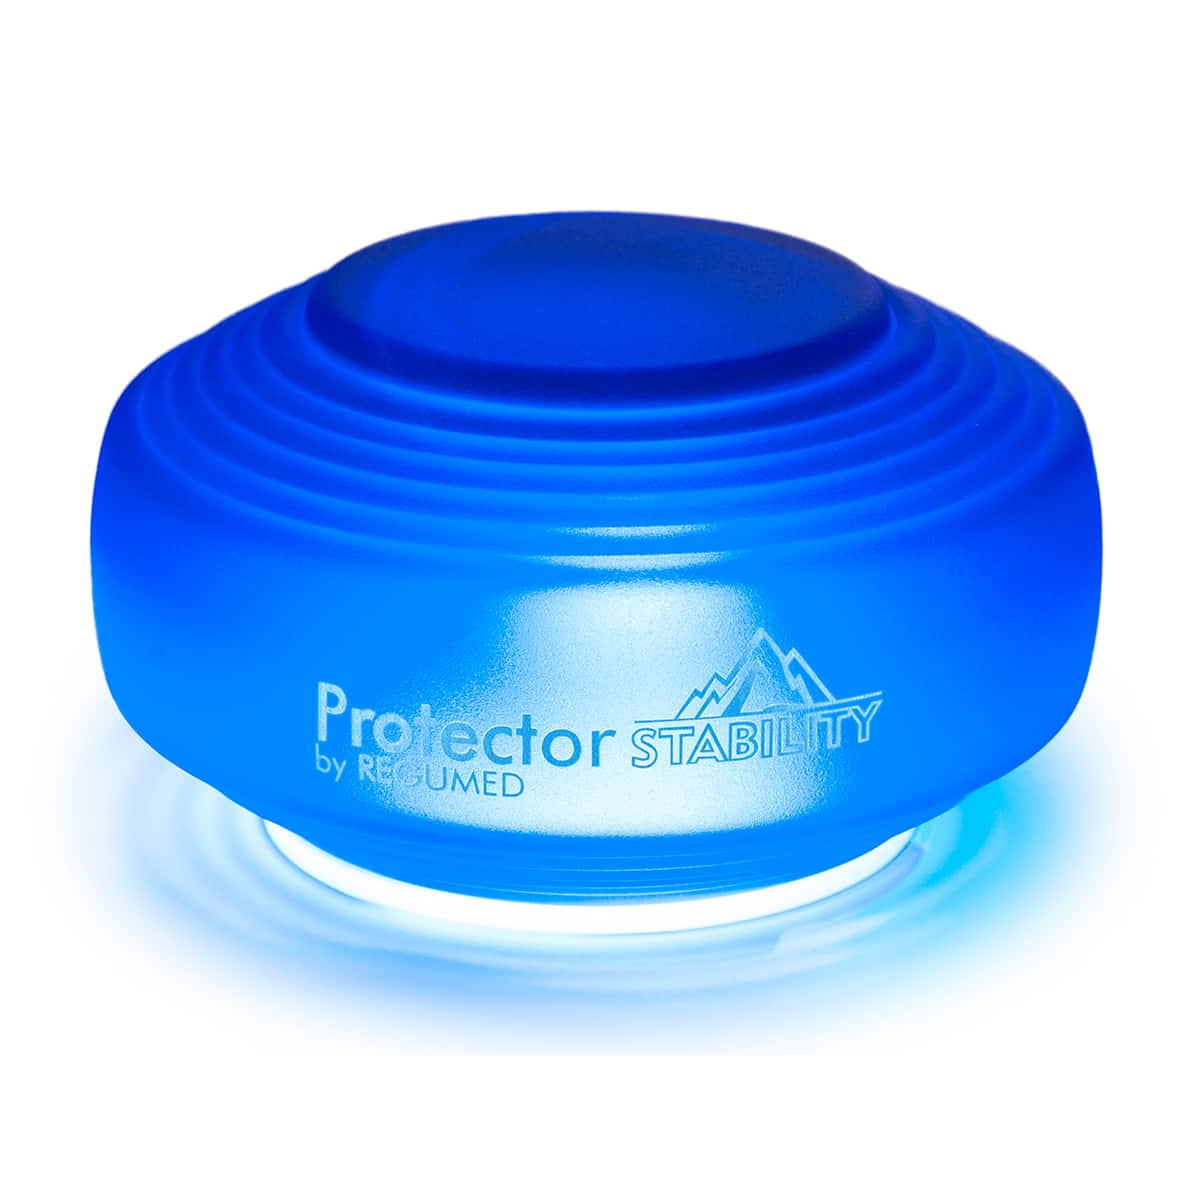 REGUMED® Protector Stability